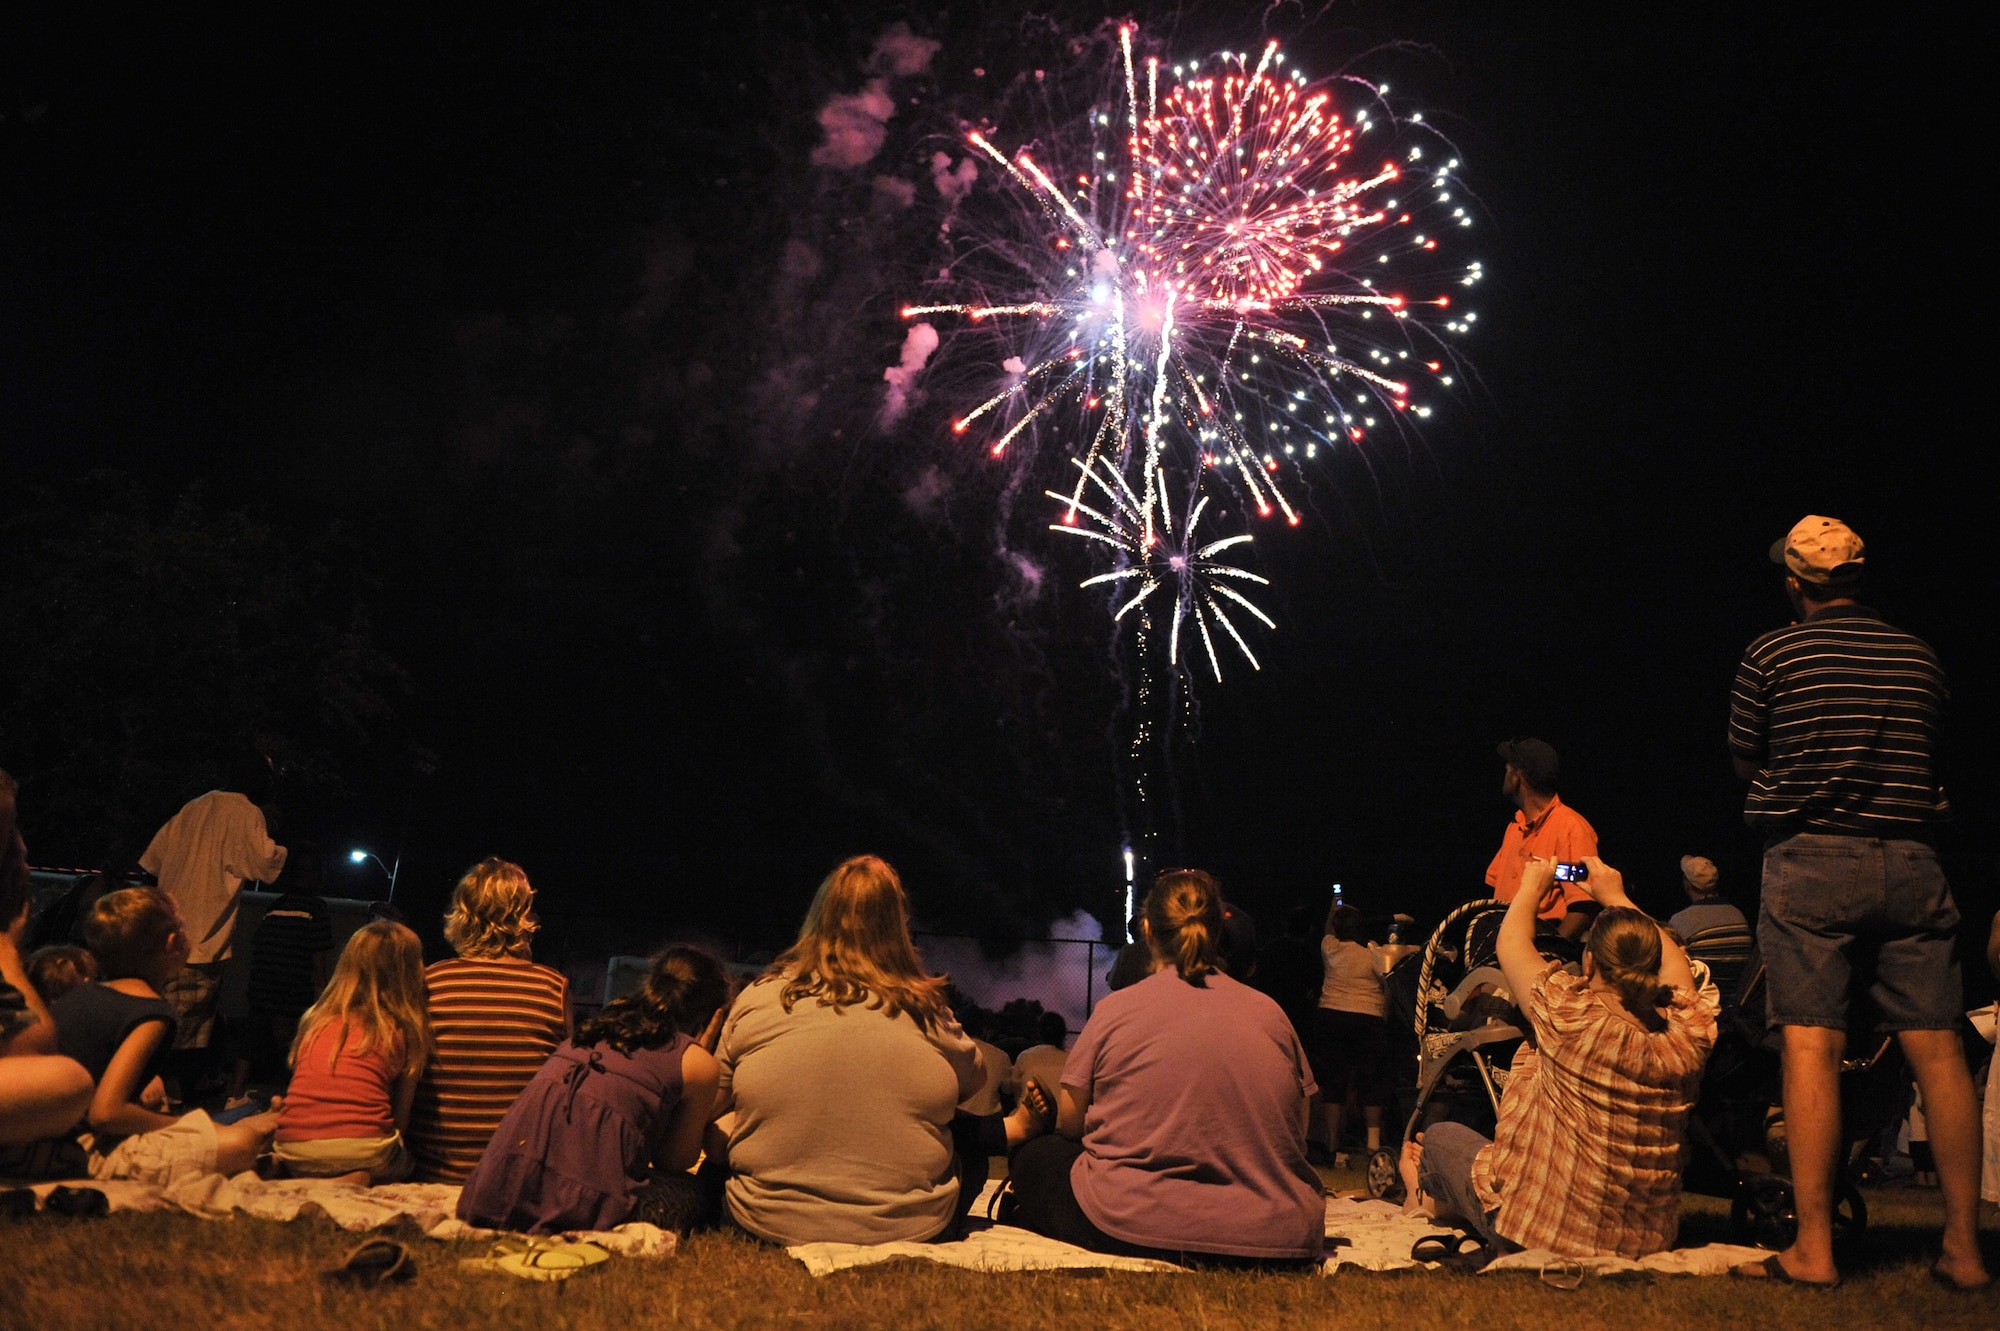 Sumter, S.C. -- Sumter locals watch the fireworks display at the end of the Jammin' July 4th celebration. The Sumter and Shaw Air Force Base communities come together every year for music and a fireworks show. Shaw helps sponsor the event every year to give back to its host community. (U.S. Air Force photo/Senior Airman Kathrine McDowell)
